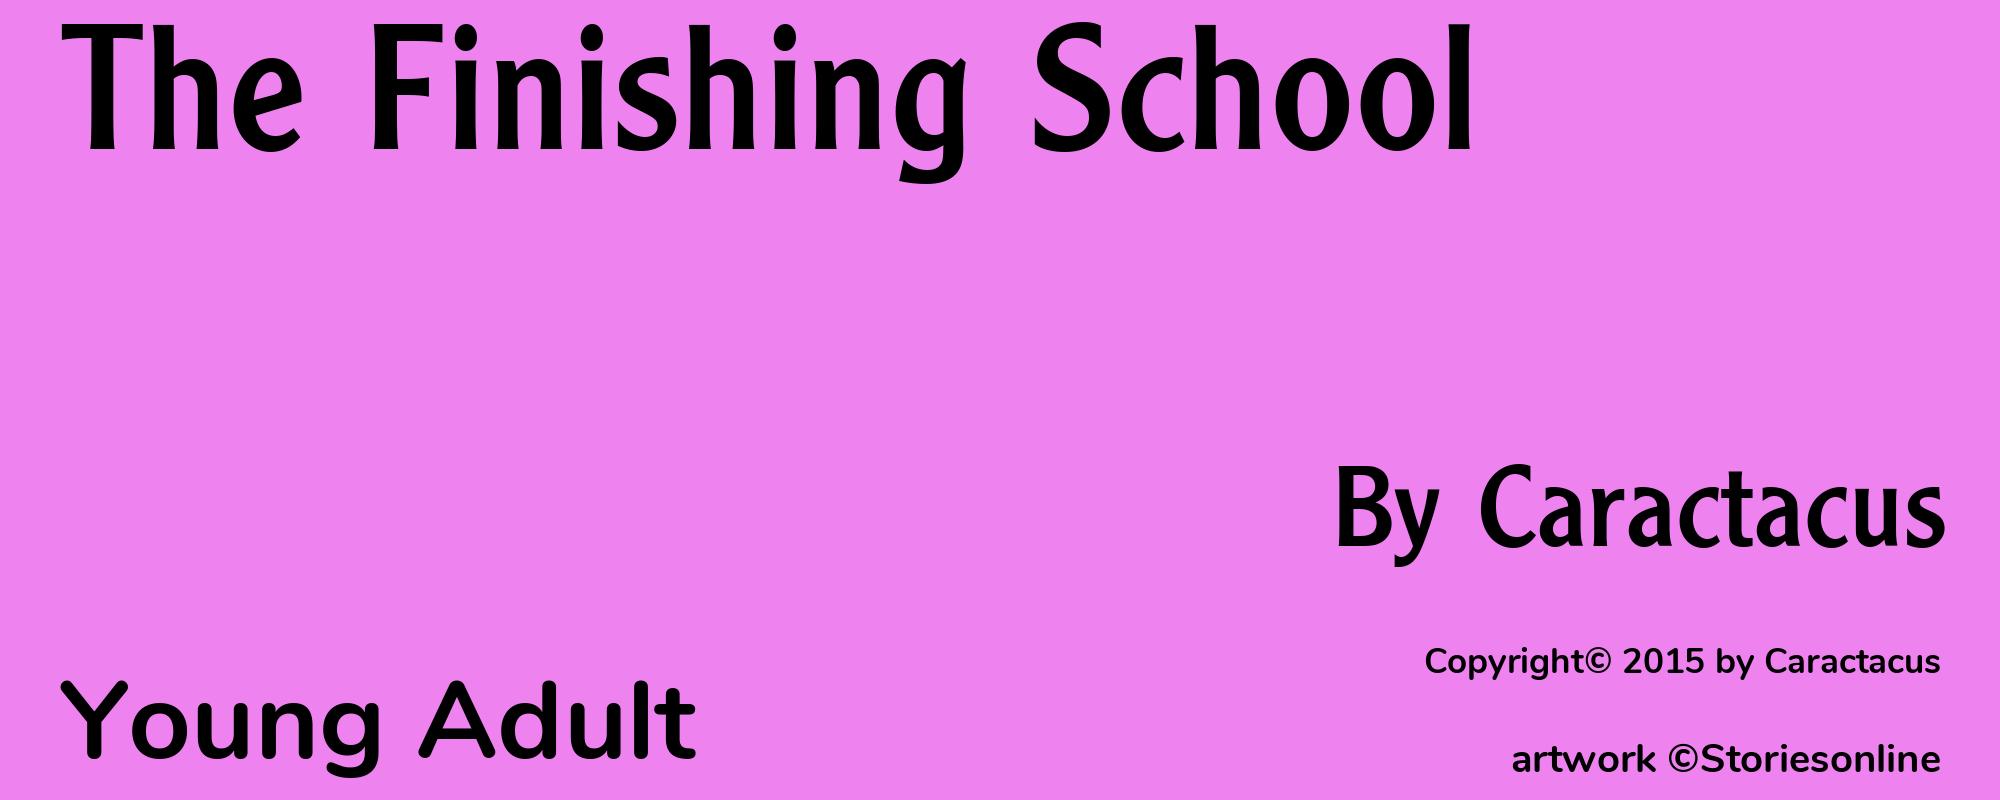 The Finishing School - Cover